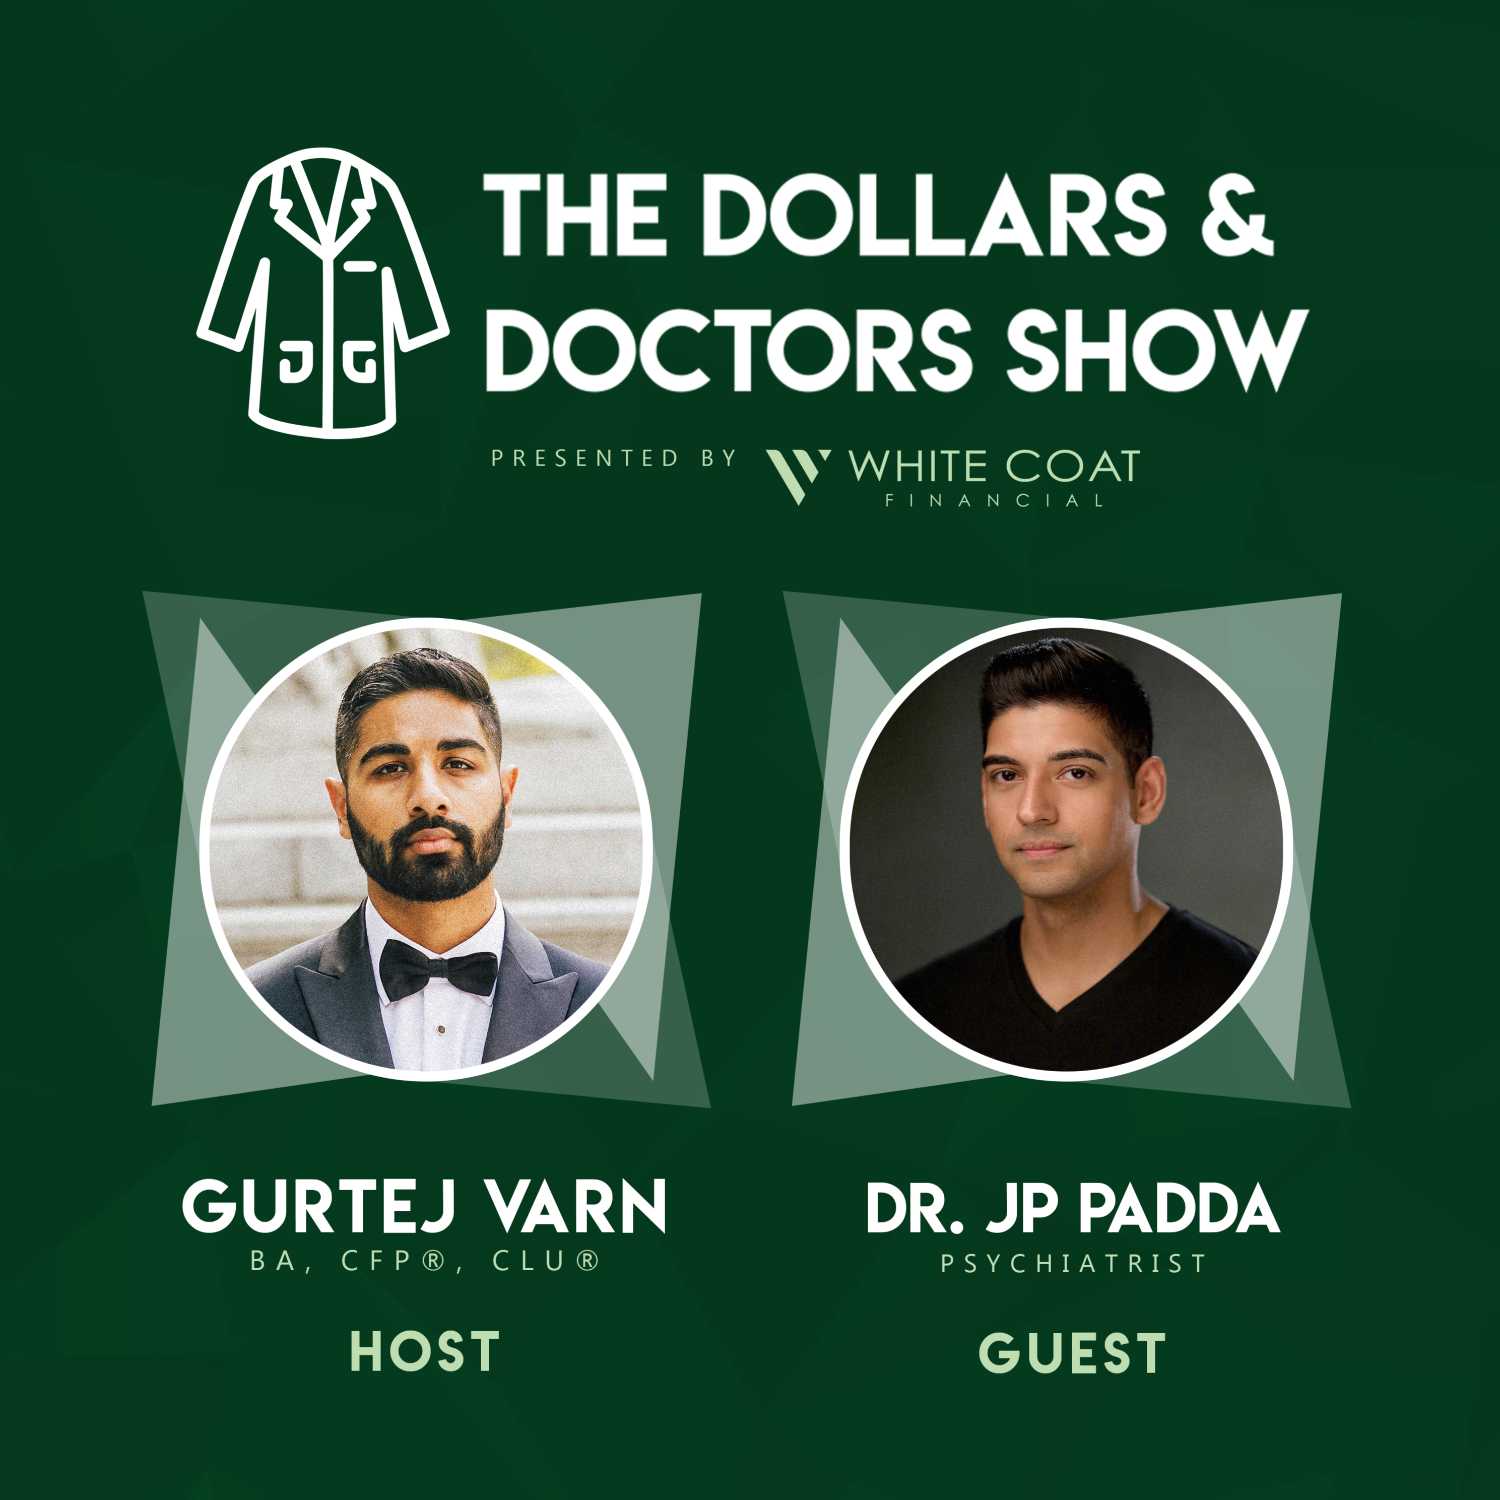 Episode 14: Dr. JP Padda - A Double Act: Psychiatry, Acting, and the Pursuit of Balance